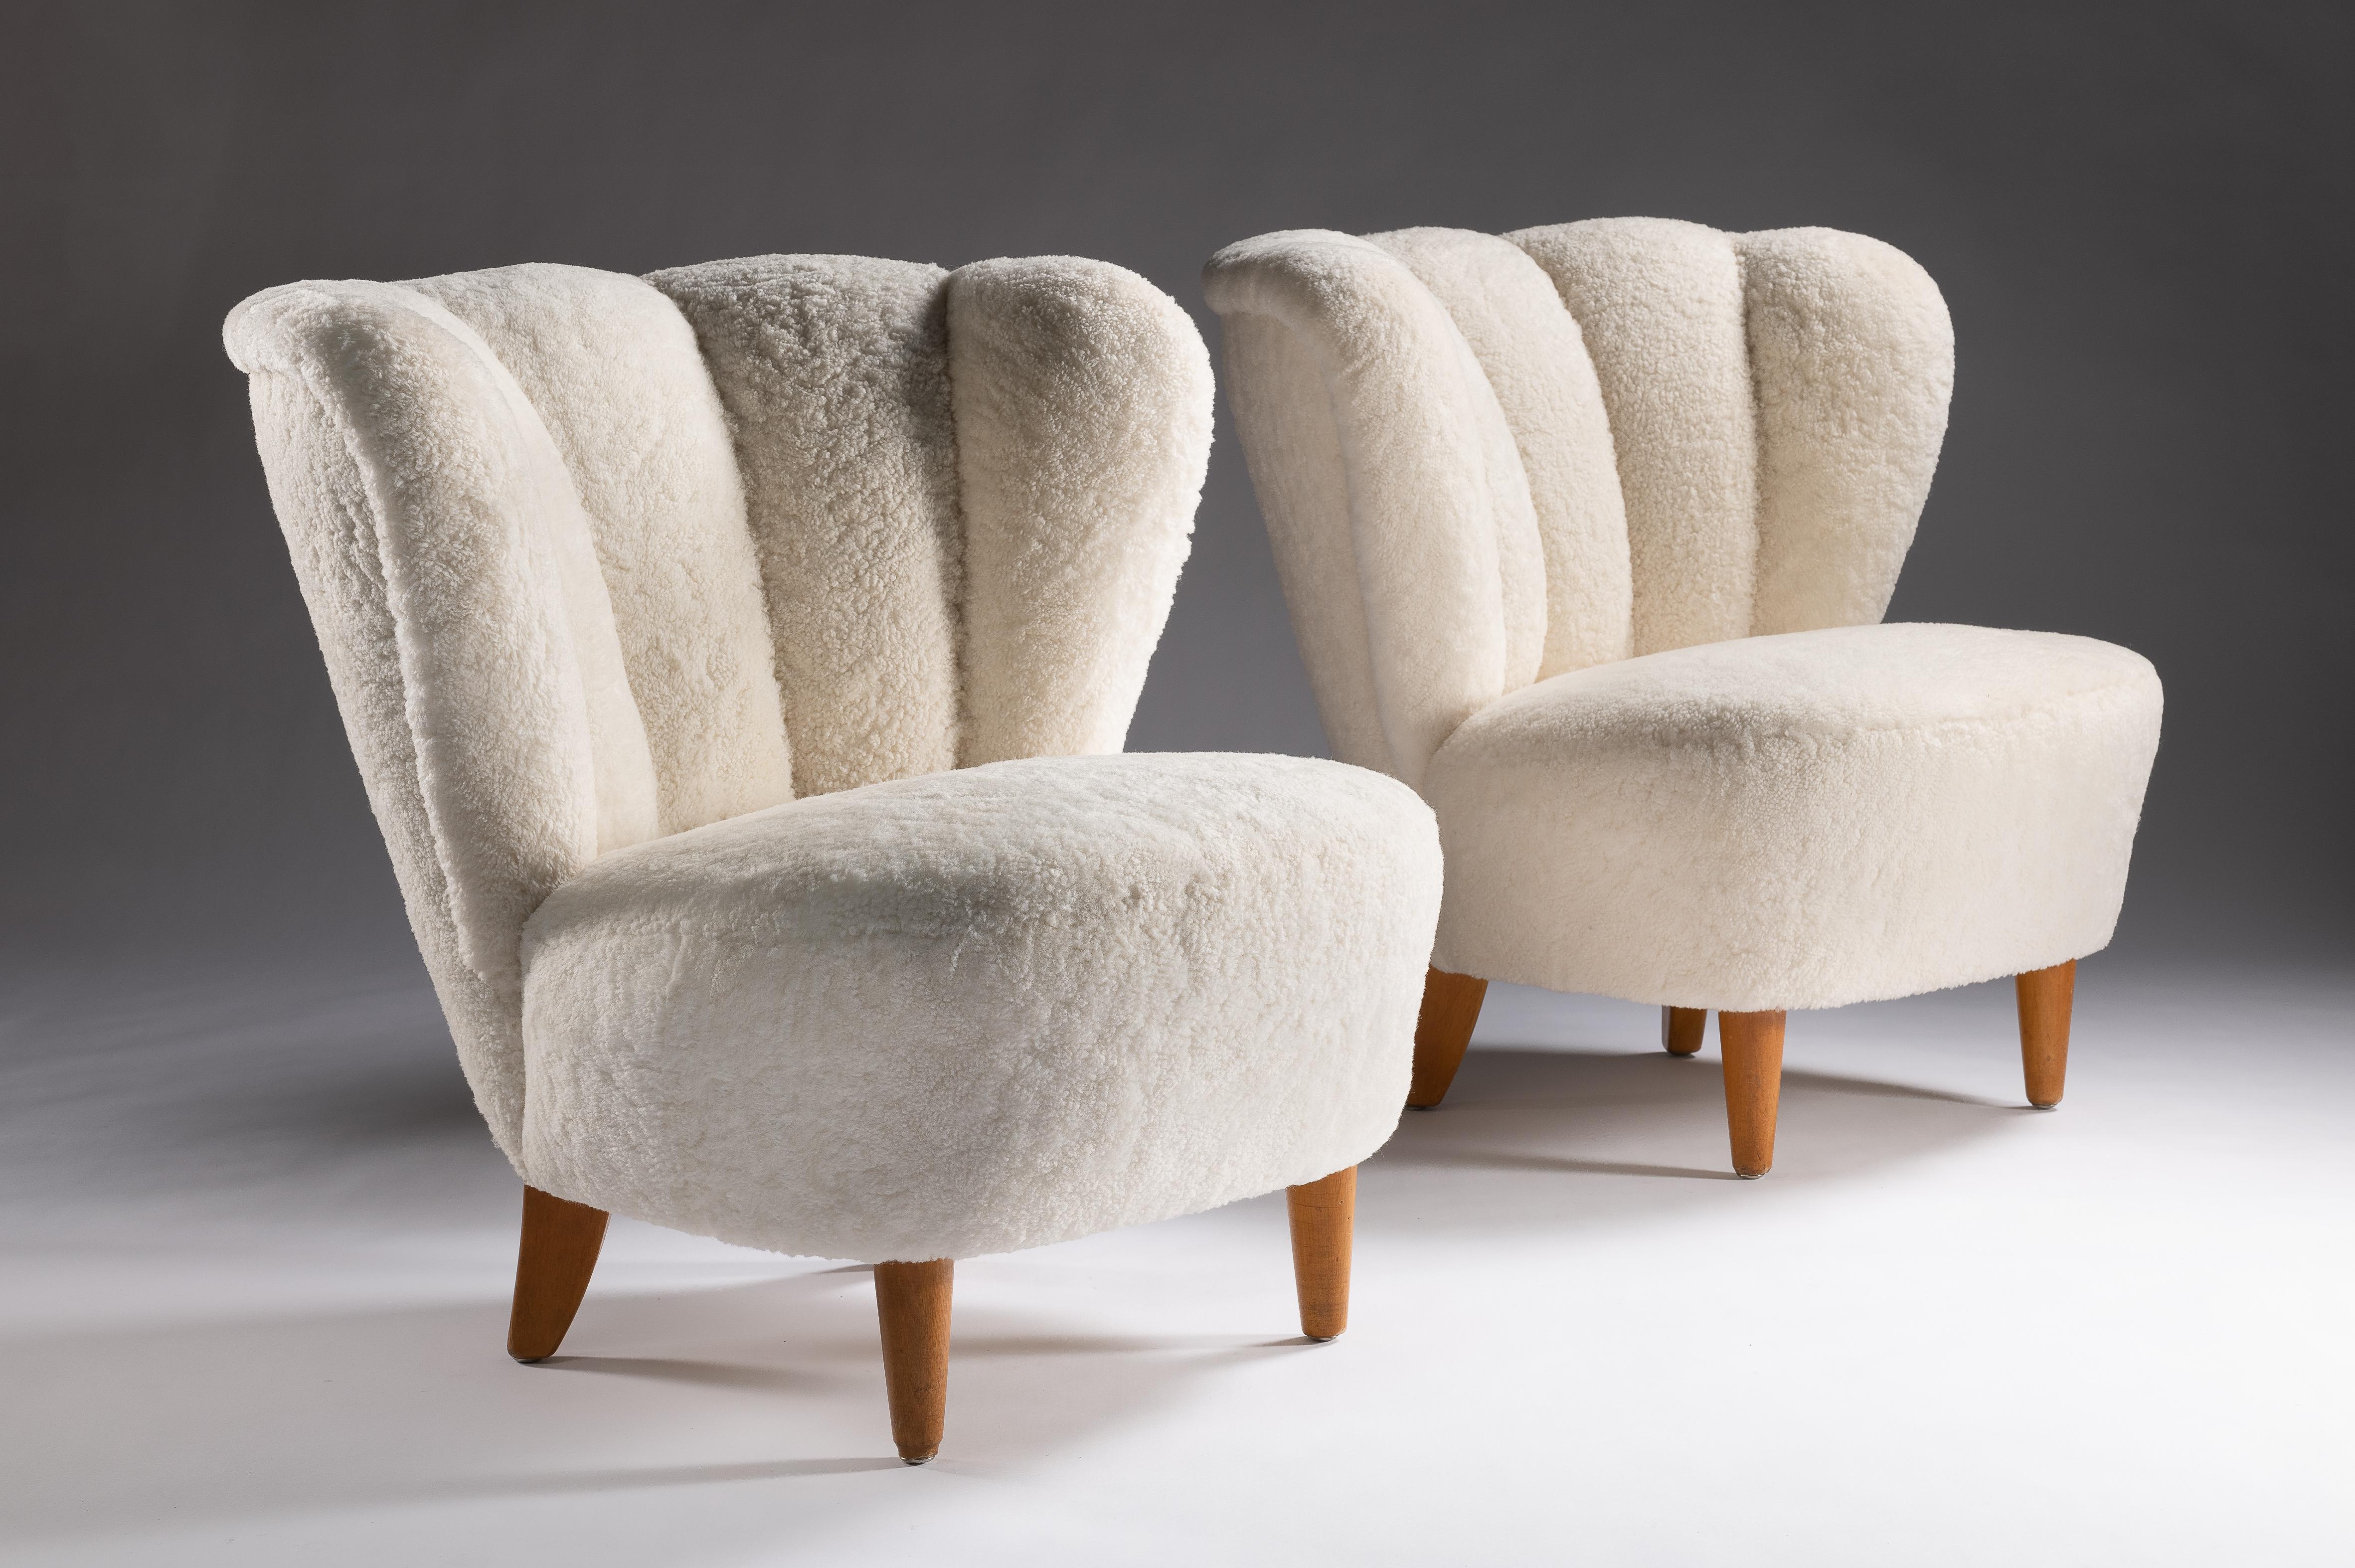 French Pair of Scandinavian Vintage White Easy Chairs 1950s, Shearling Upholstery For Sale